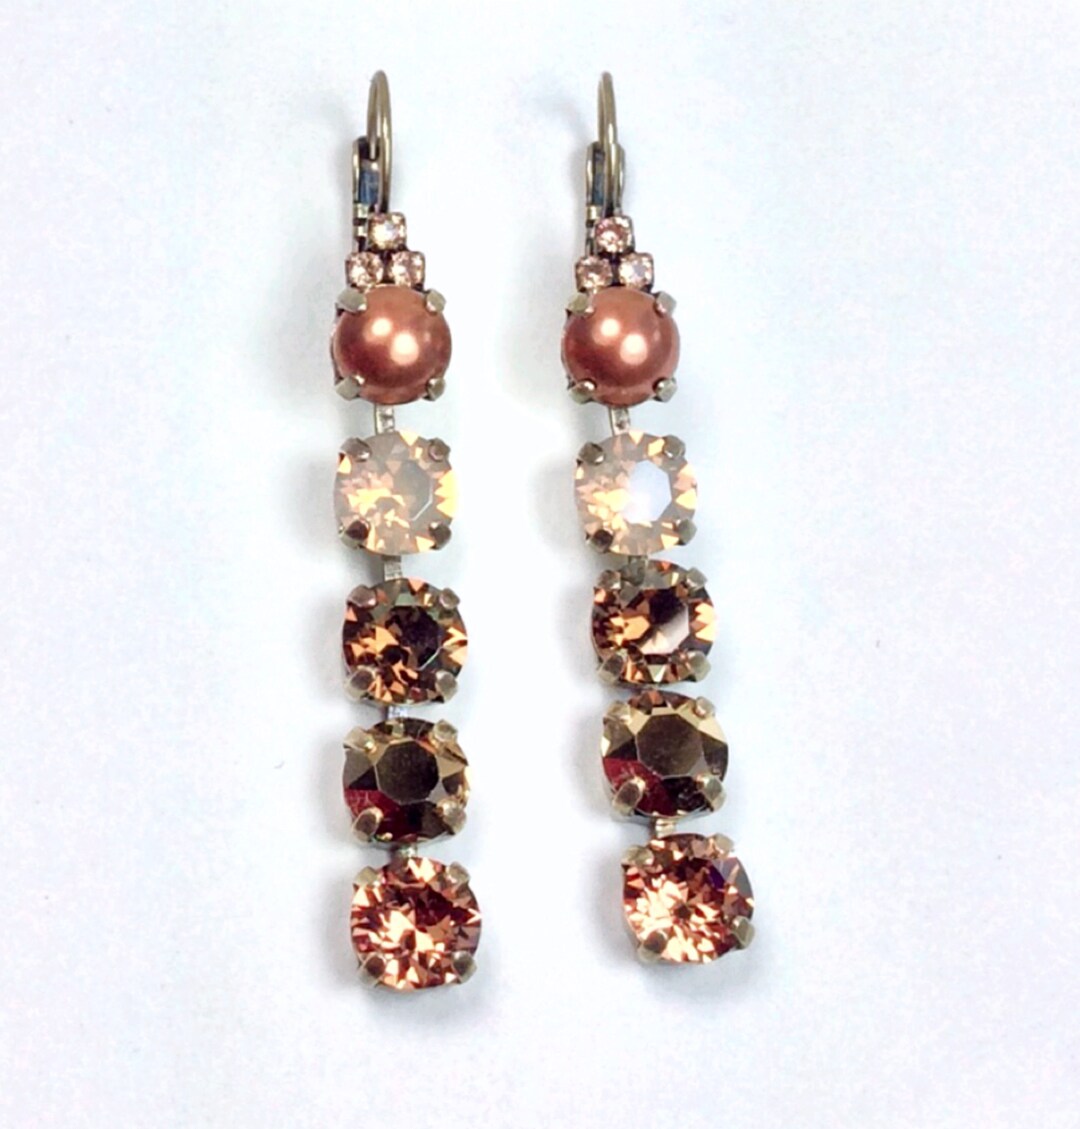 Finest Crystal 8.5mm FIVE Tier Earrings Gorgeous Fall Colors - Etsy